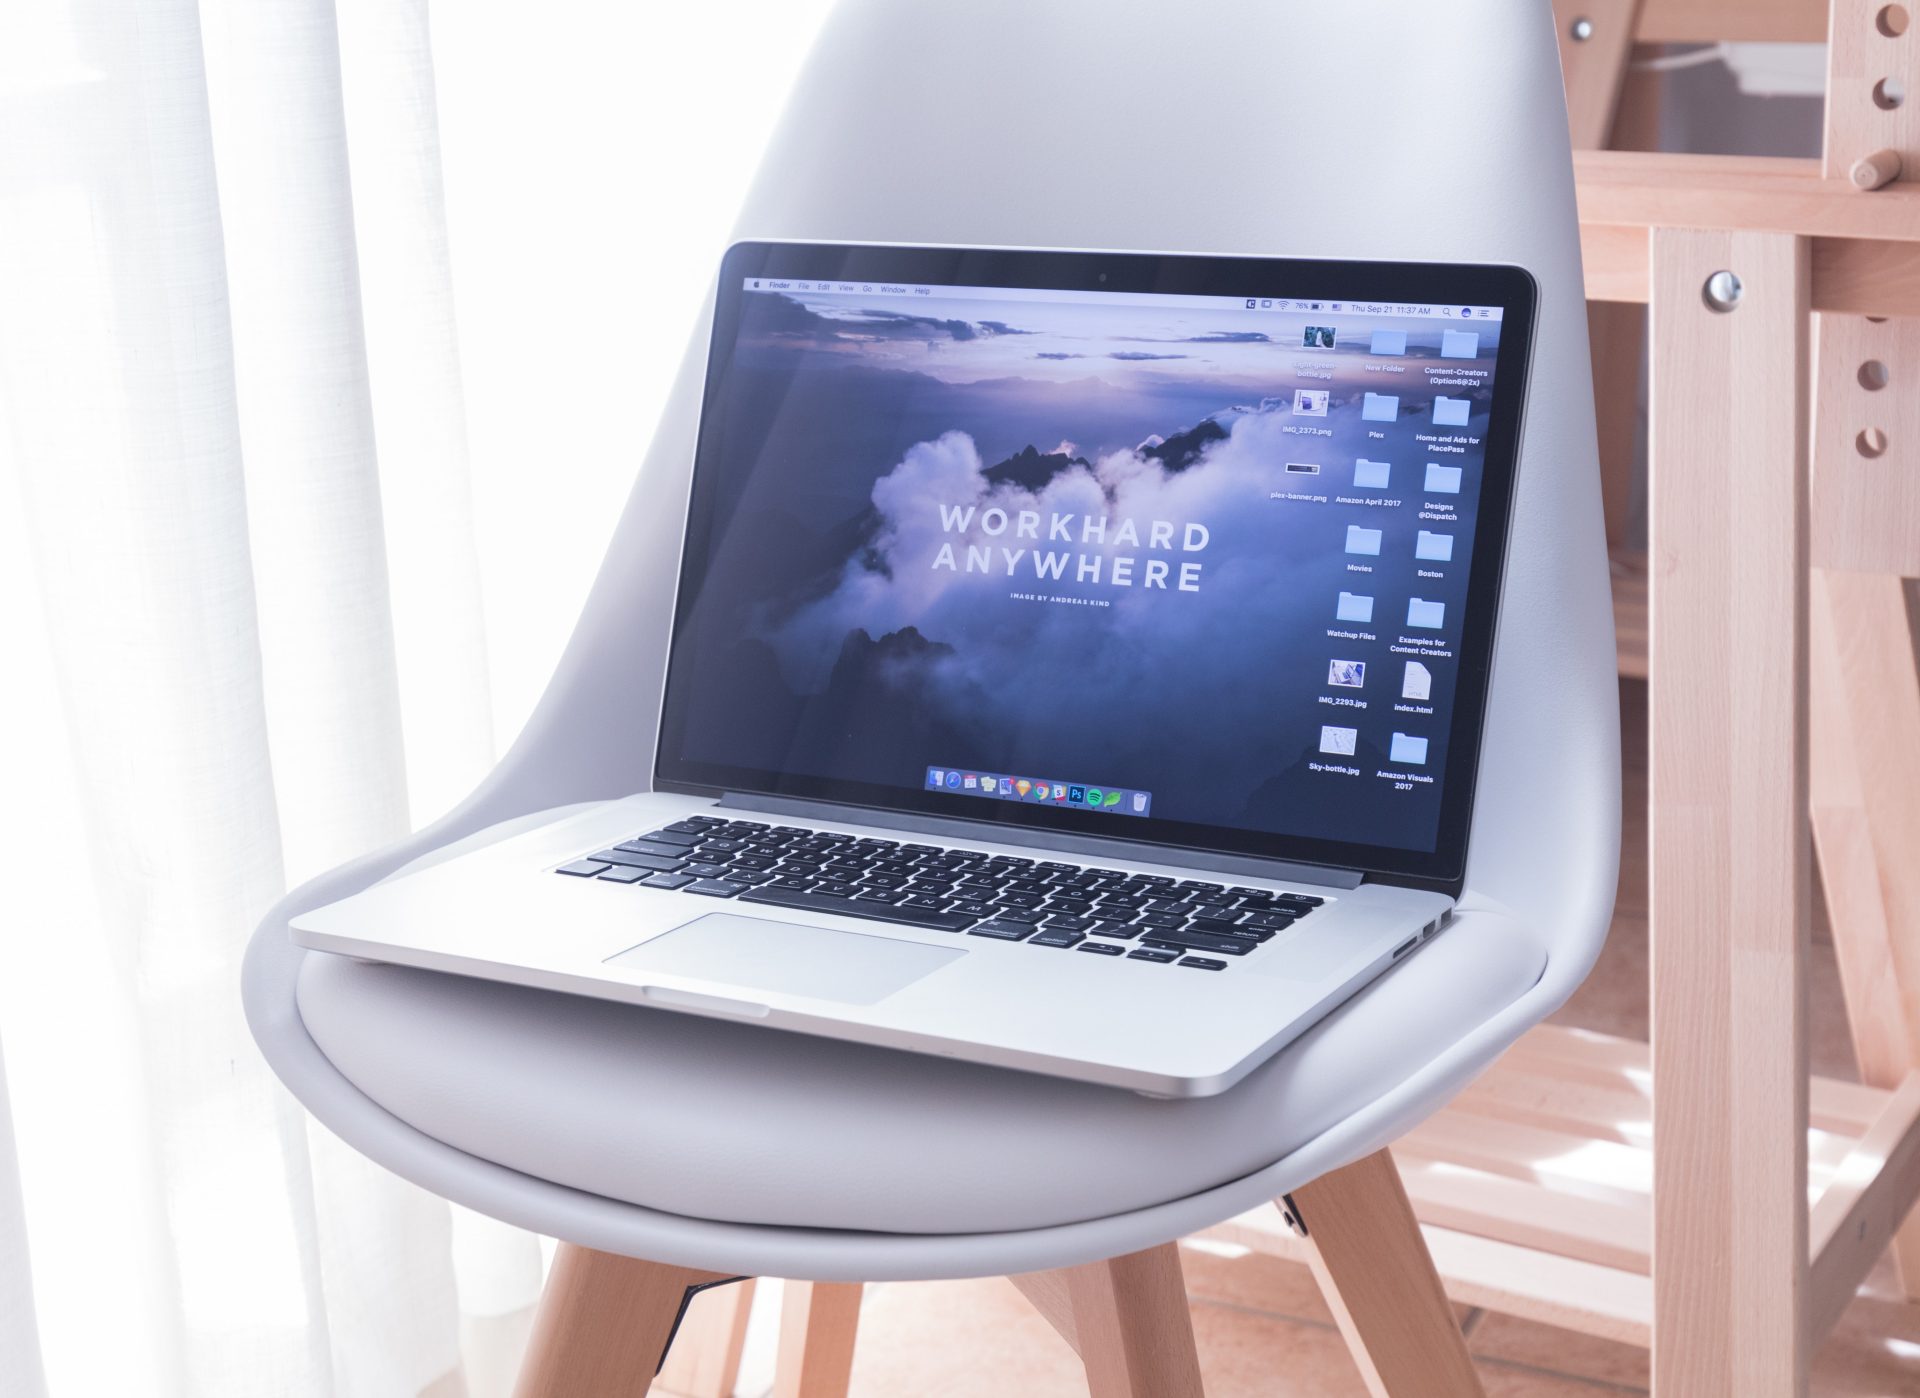 MacBook placed on a chair